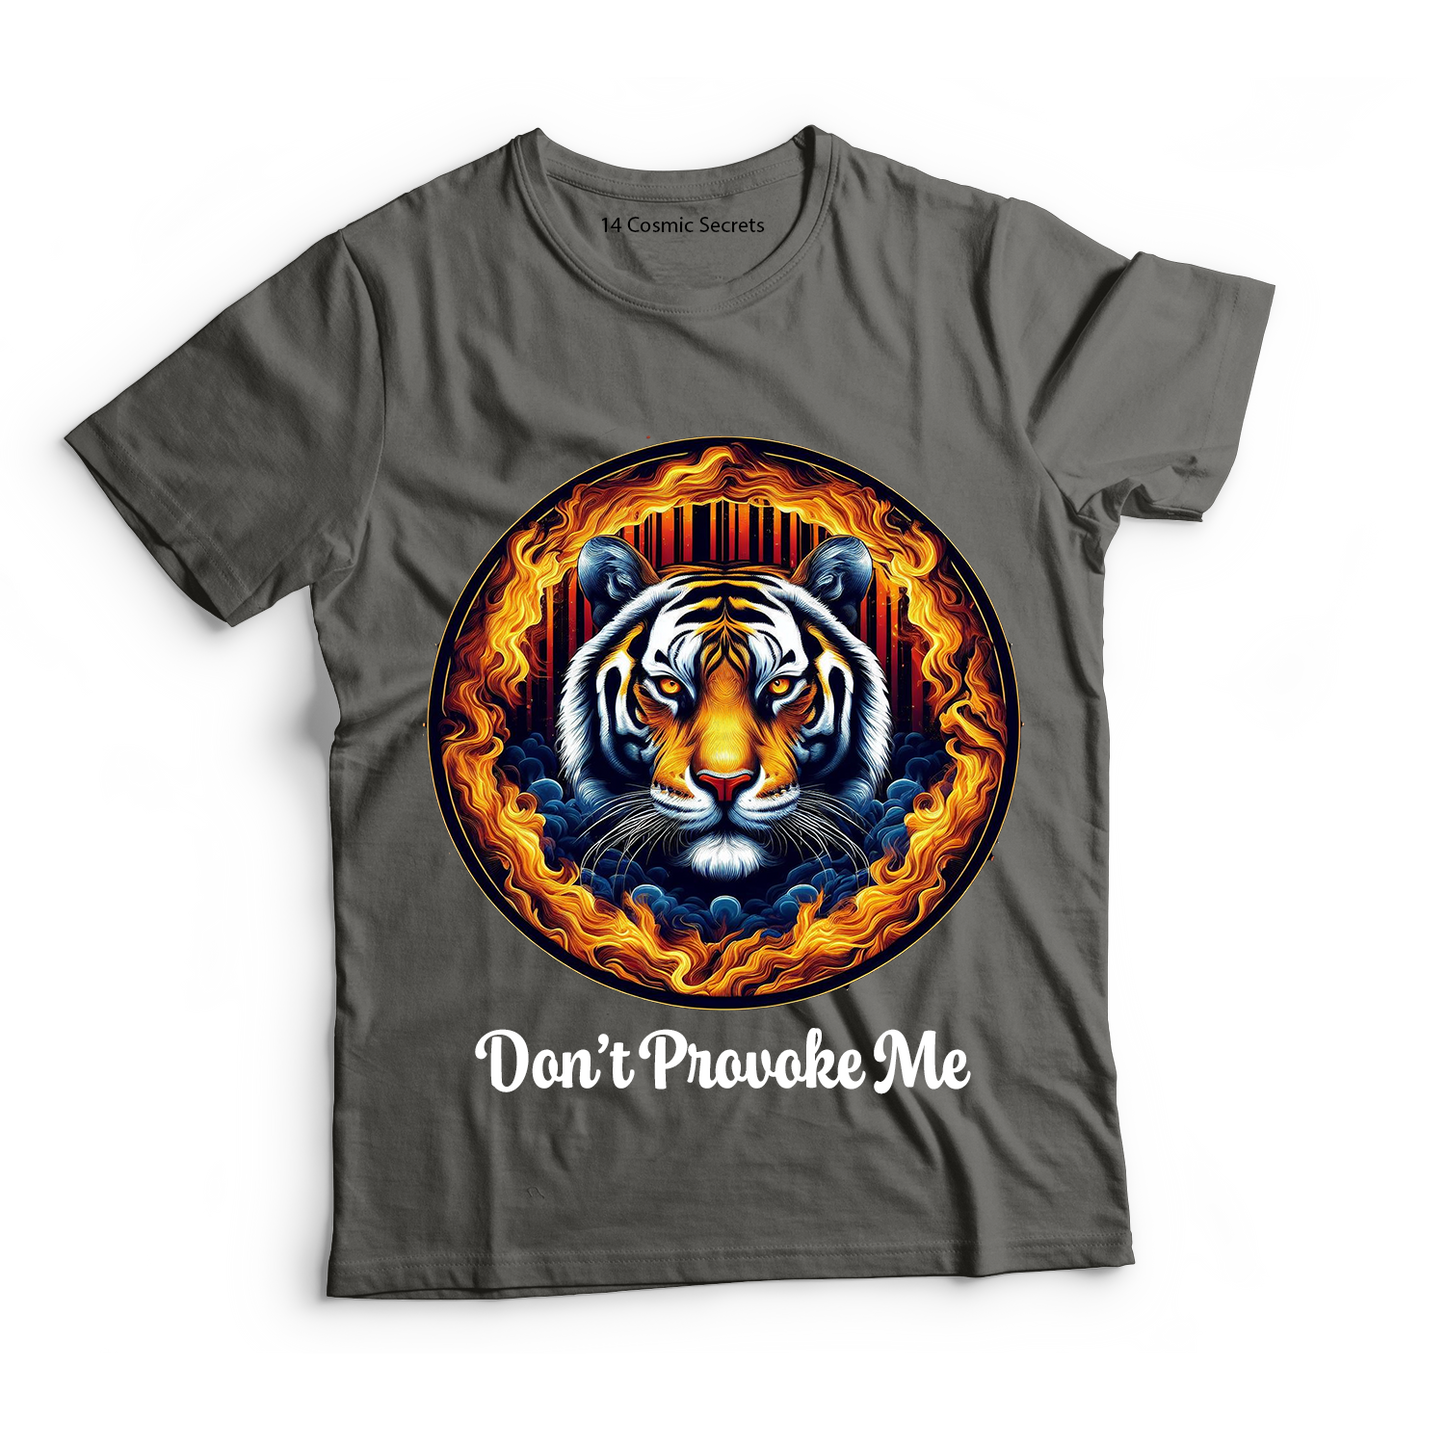 Jungle Royalty Apparel Graphic Printed T-Shirt  Cotton T-Shirt Magnificence of India T-Shirt